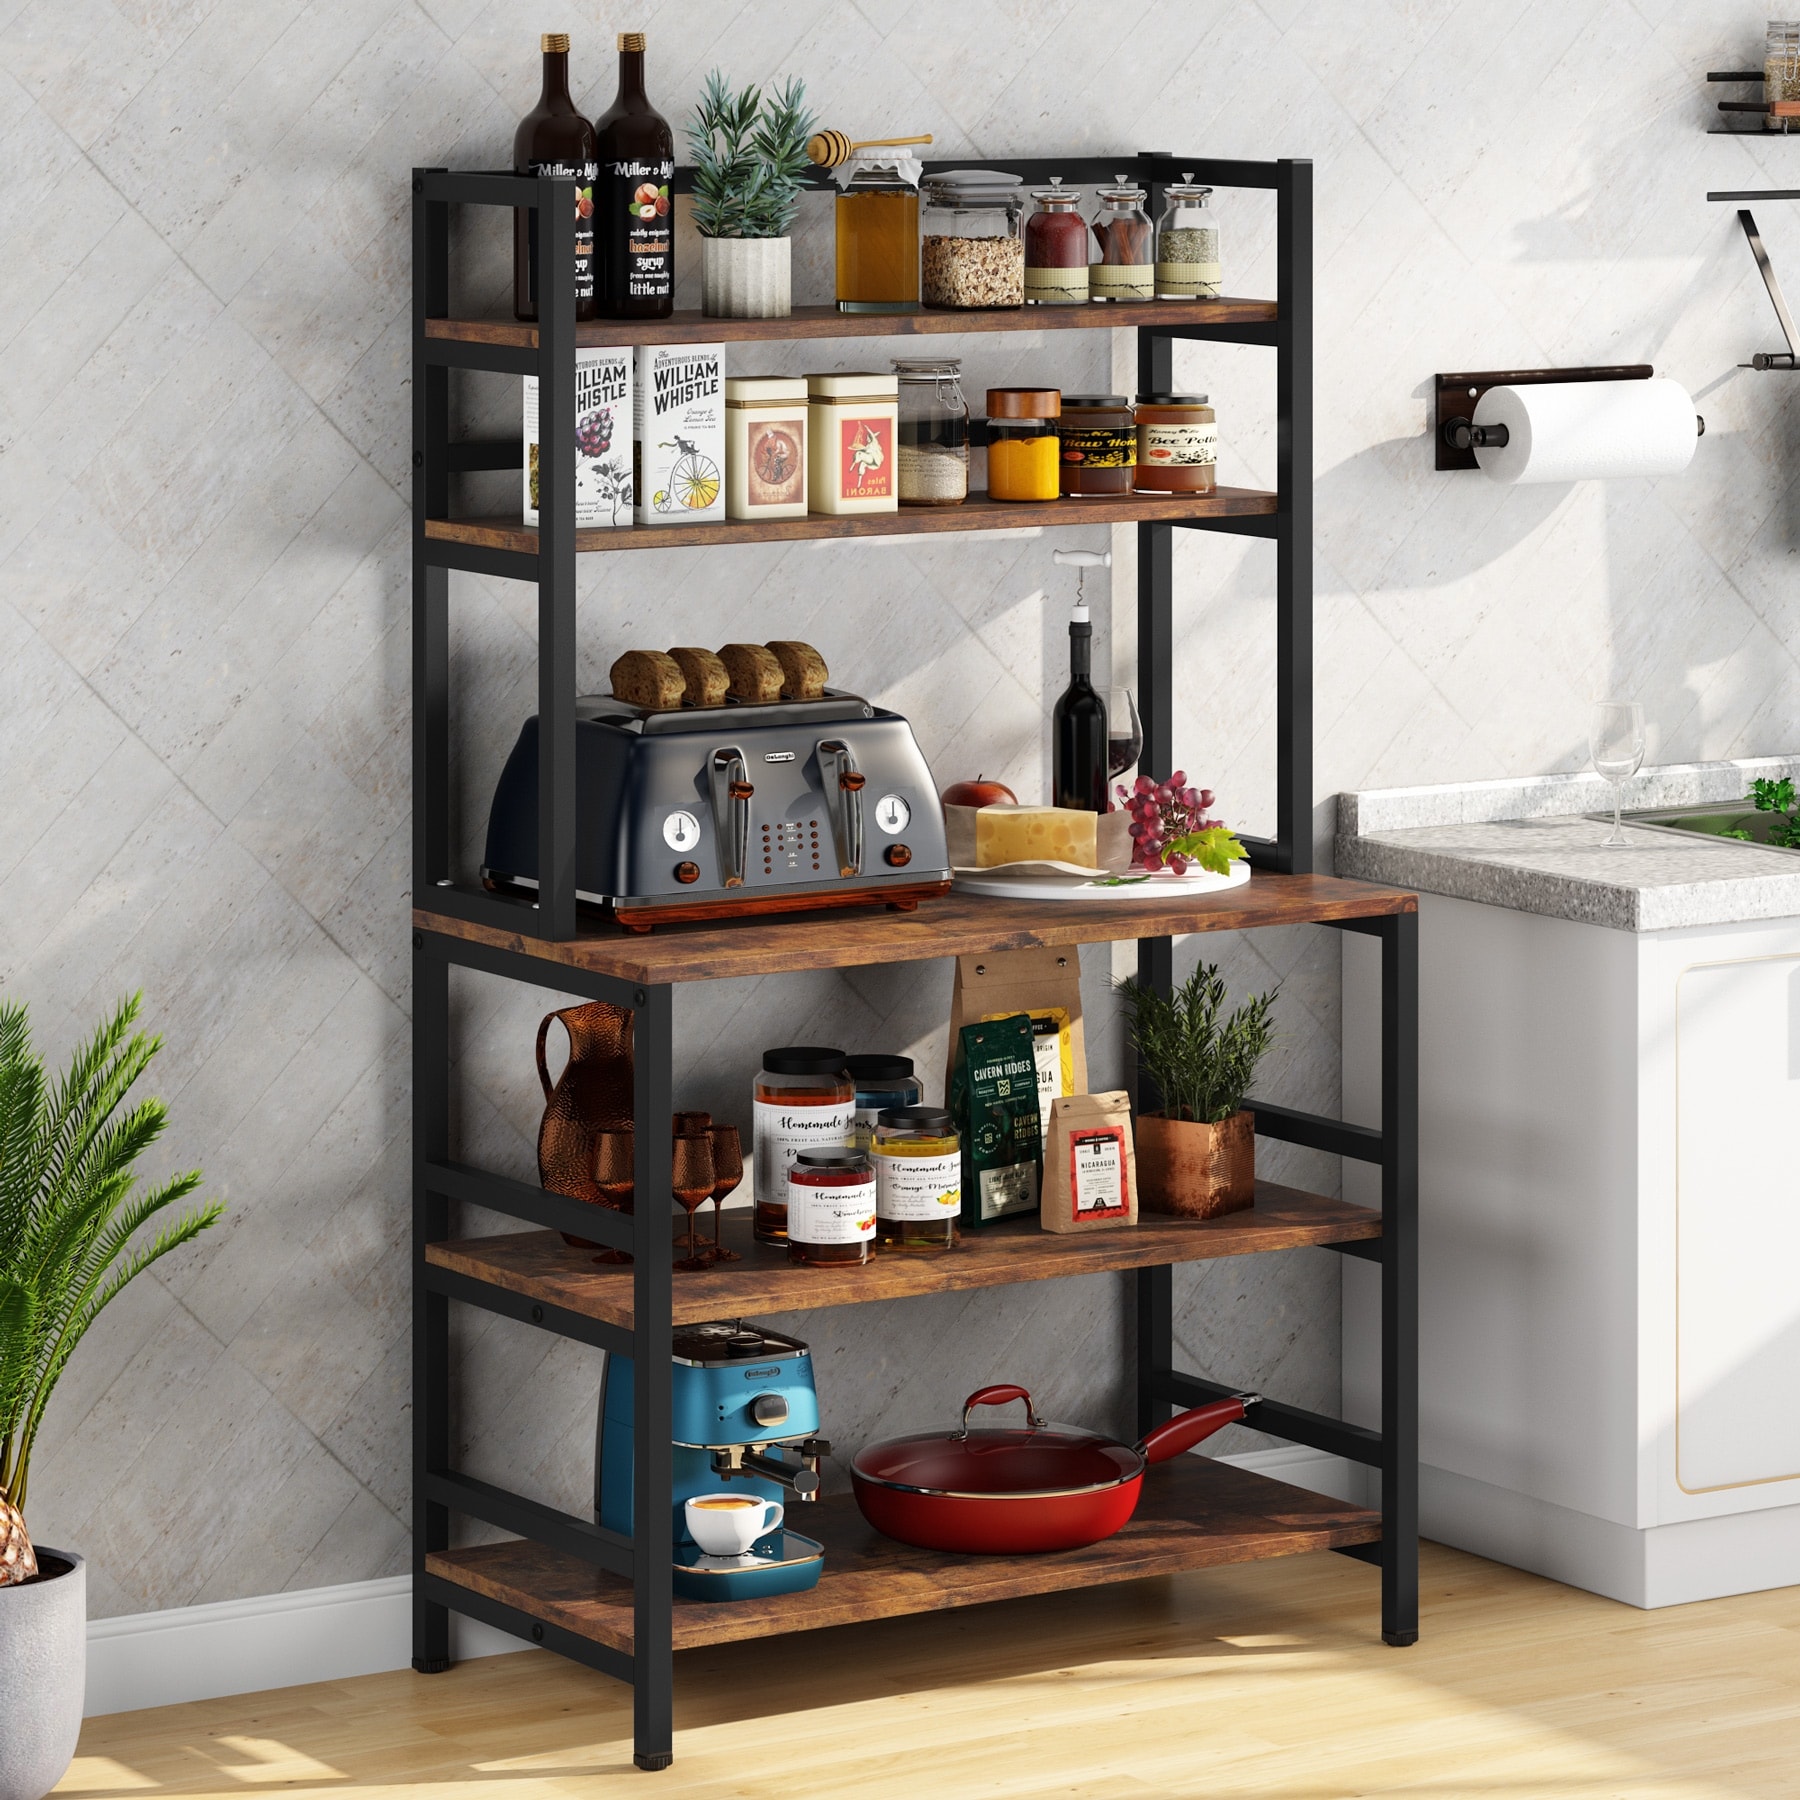 https://ak1.ostkcdn.com/images/products/is/images/direct/4568d2db4aa4c065f086343e415522a4bff9b304/5-Tier-Kitchen-Bakers-Rack-Utility-Storage-Shelf-Microwave-Oven-Stand%2C-Industrial-Microwave-Cart-Kitchen-Stand-with-Hutch.jpg